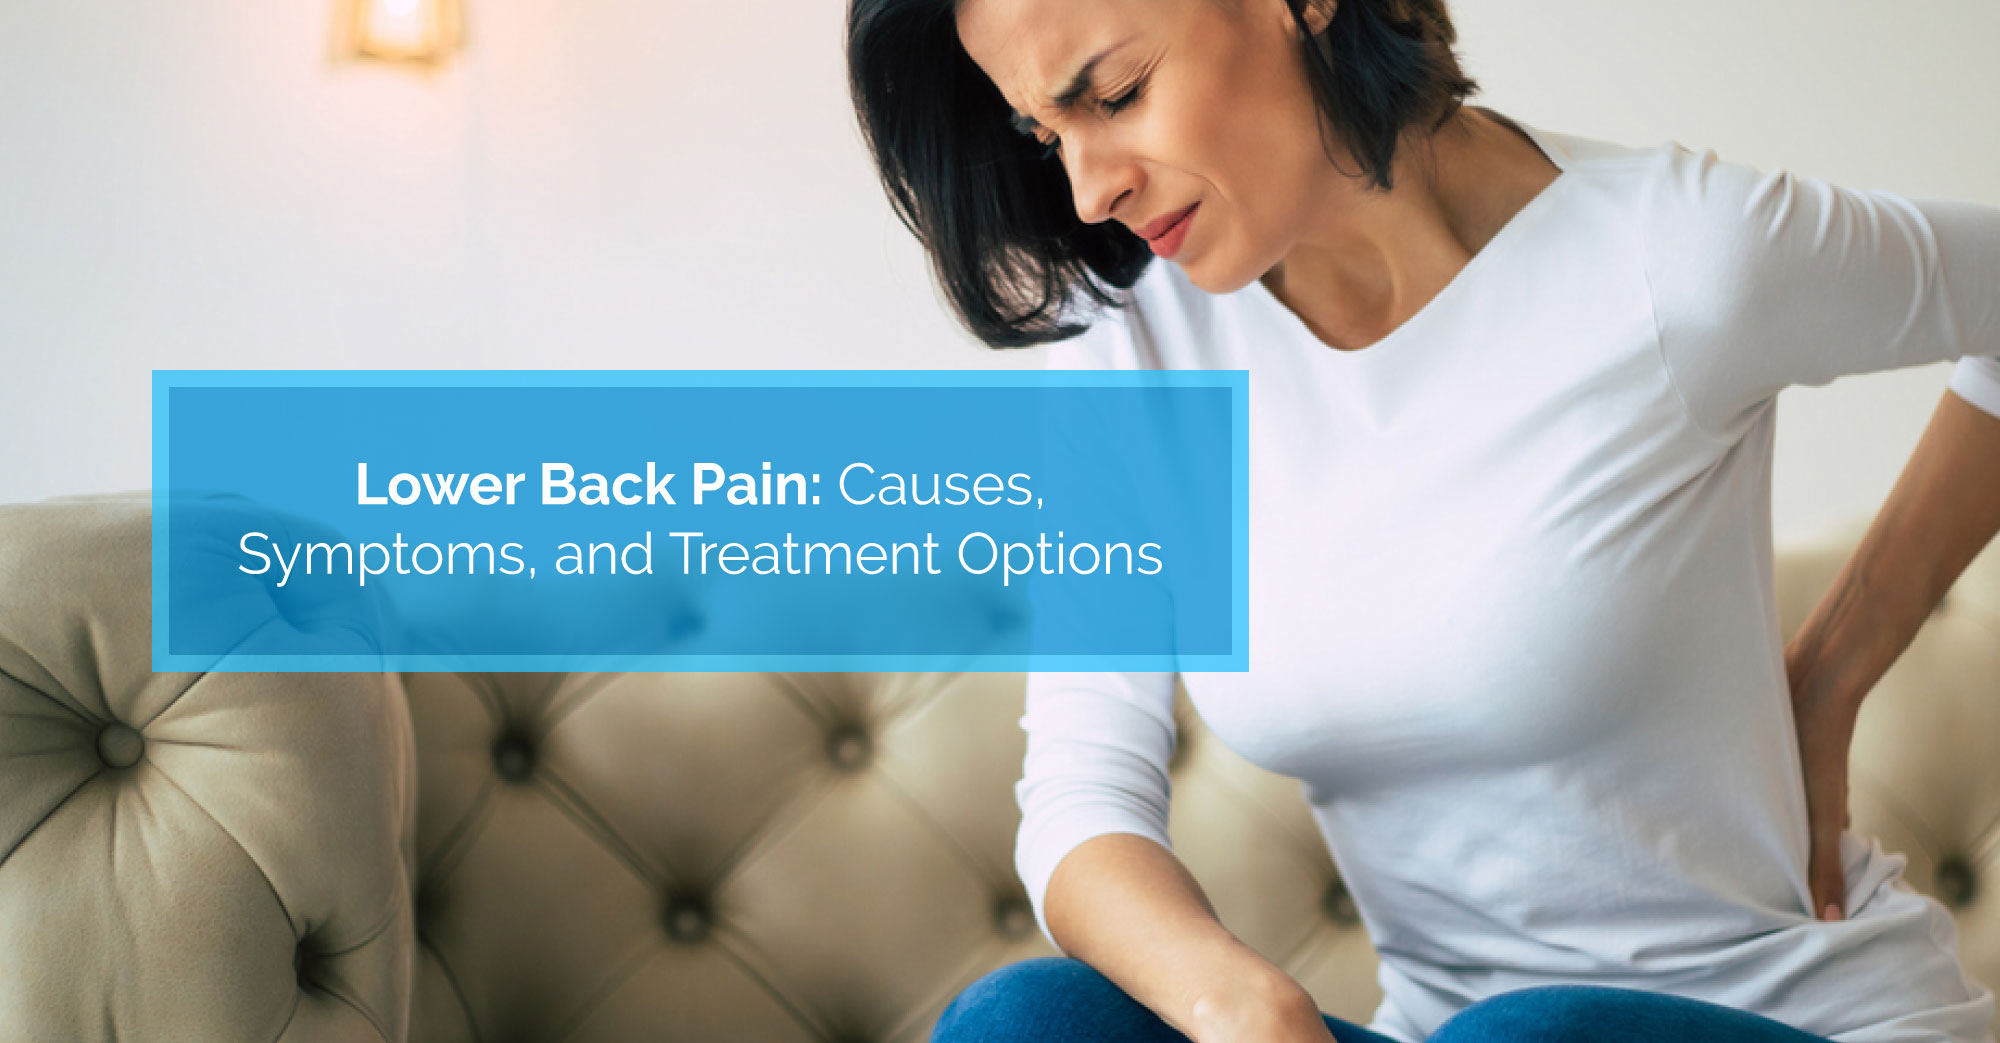 Lower Back Pain: Causes, Symptoms, and Treatment Options | Physiomed